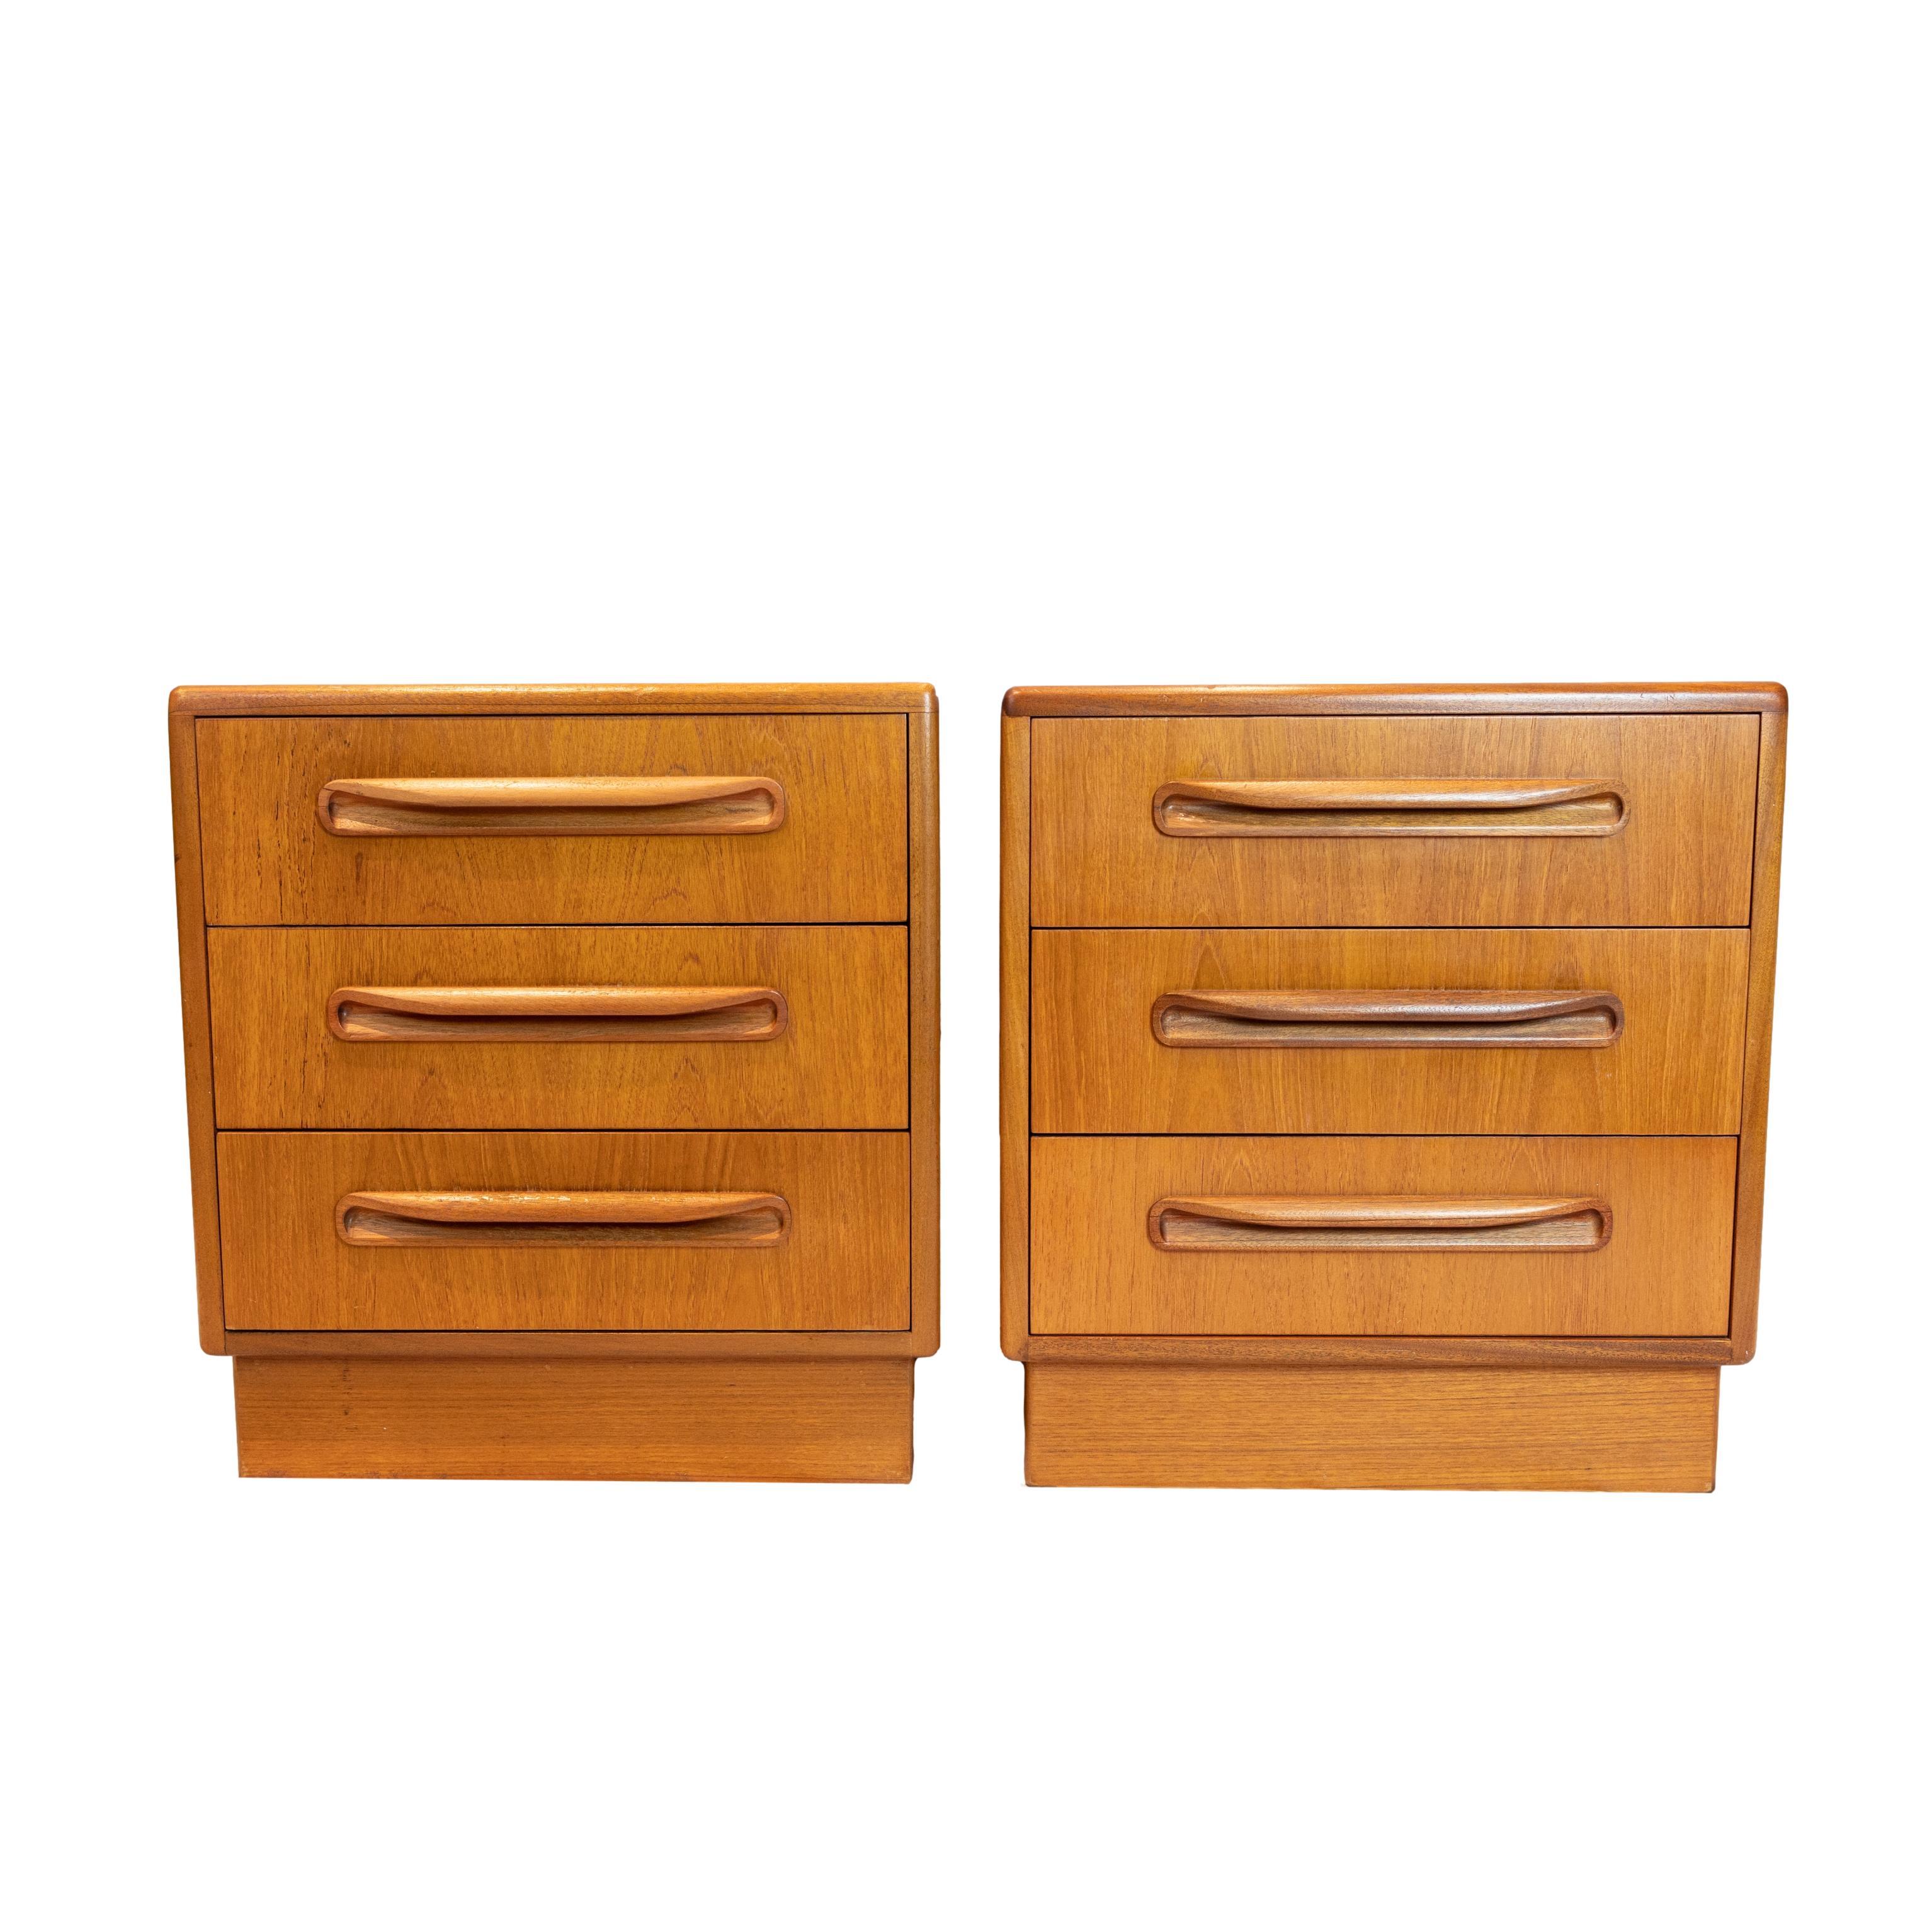 Pair of G plan teak 'Fresco' side chests by Victor Wilkins, English, ca. 1960, of cube-form, the three drawers with molded pulls, on a square plinth base, with G Plan label to the top interior drawers. 
G Plan was a revolutionary concept that